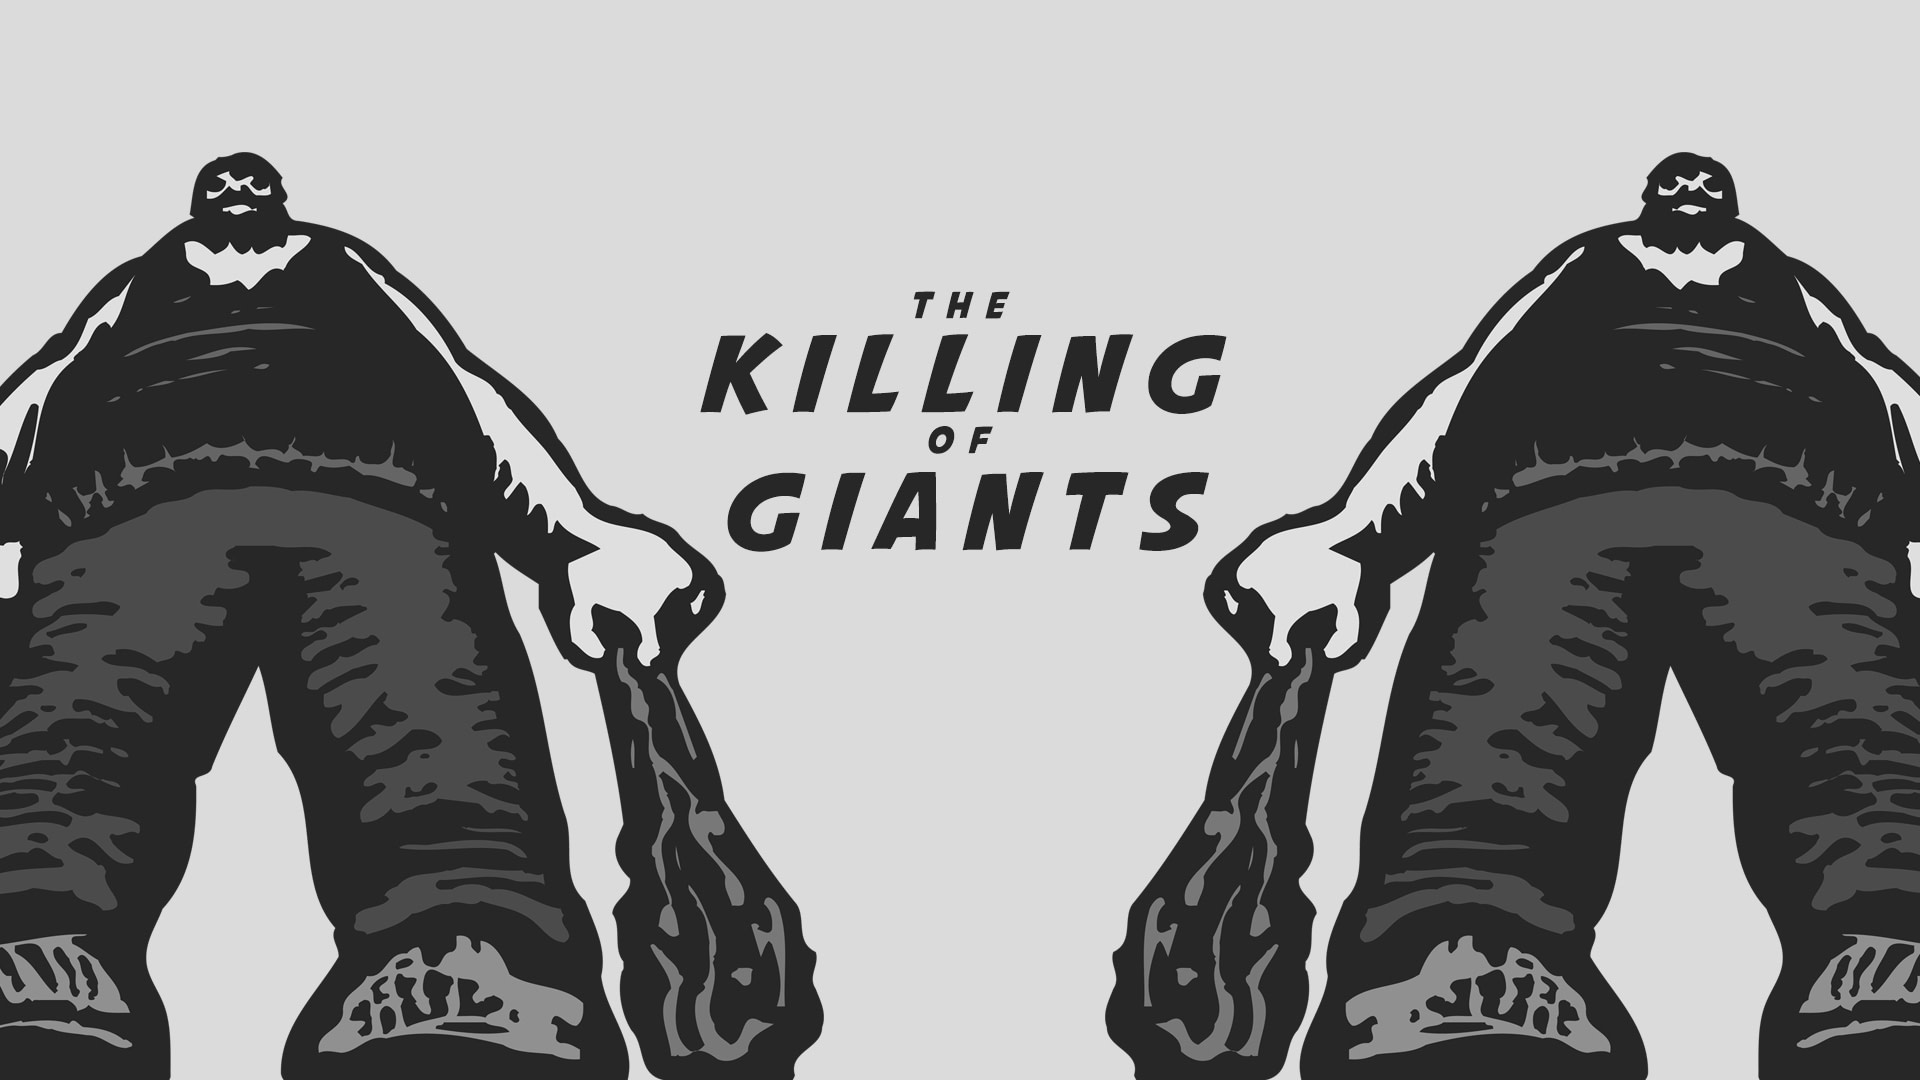 How to Kill Giants – According to the Bible